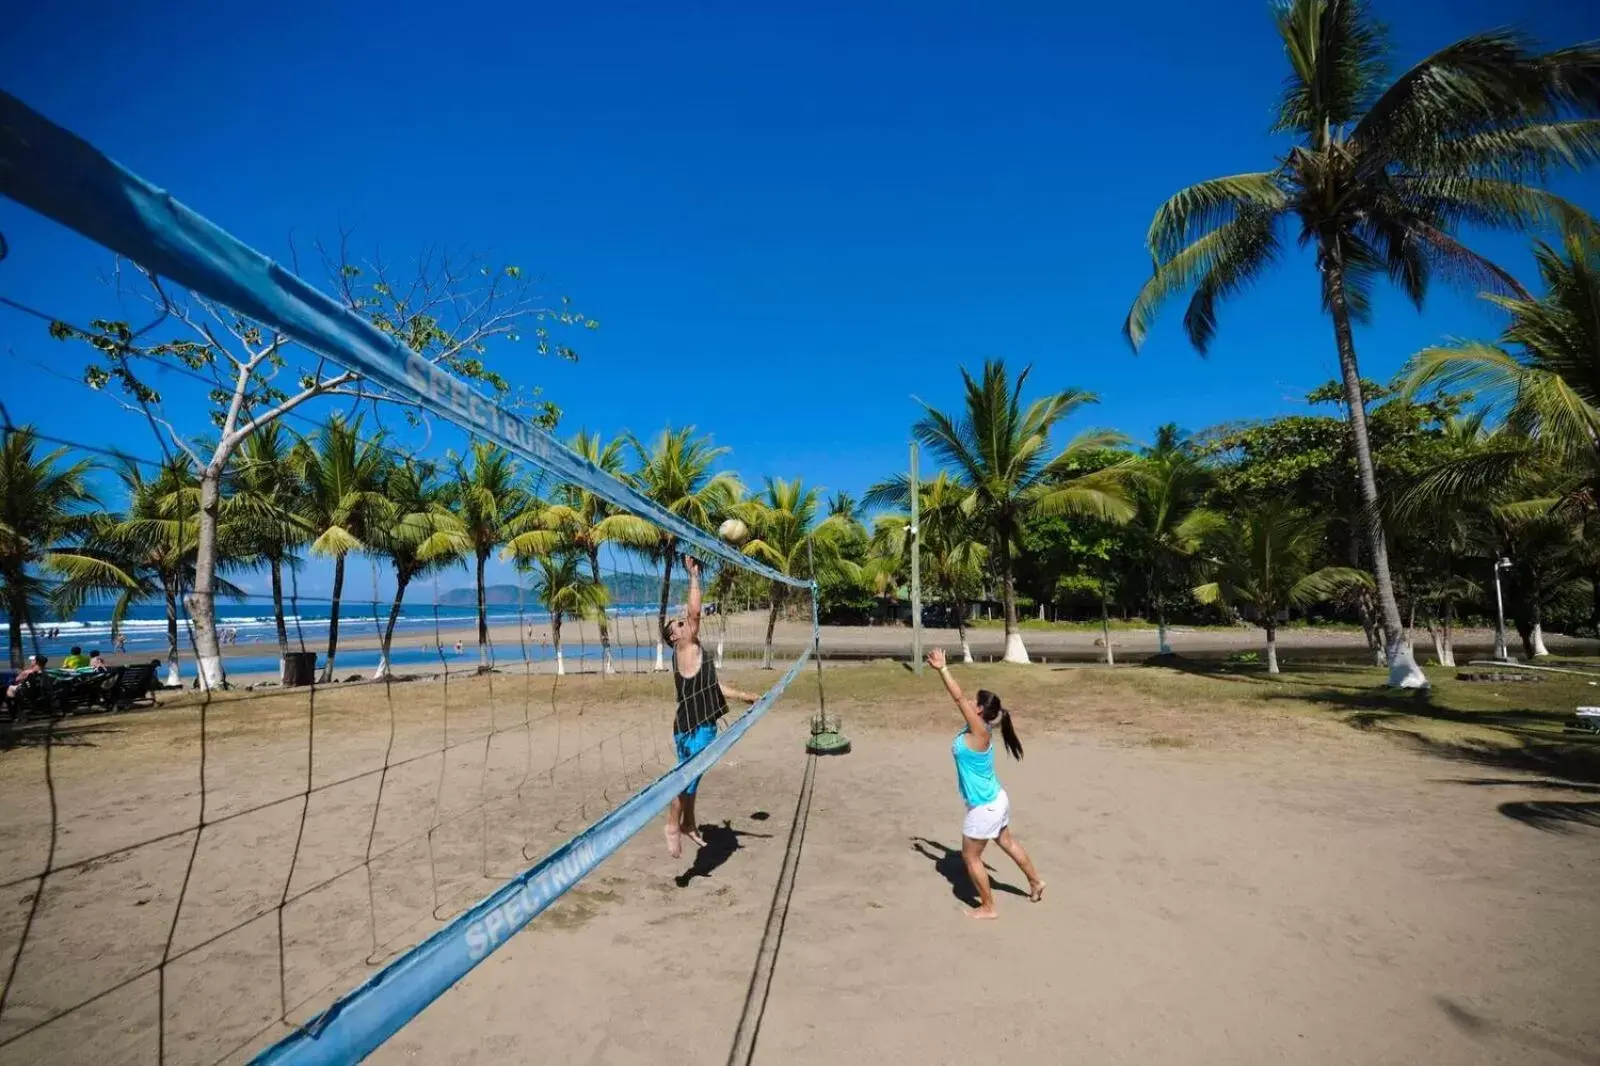 Children's Play Area in Costa Rica Surf Camp by SUPERbrand